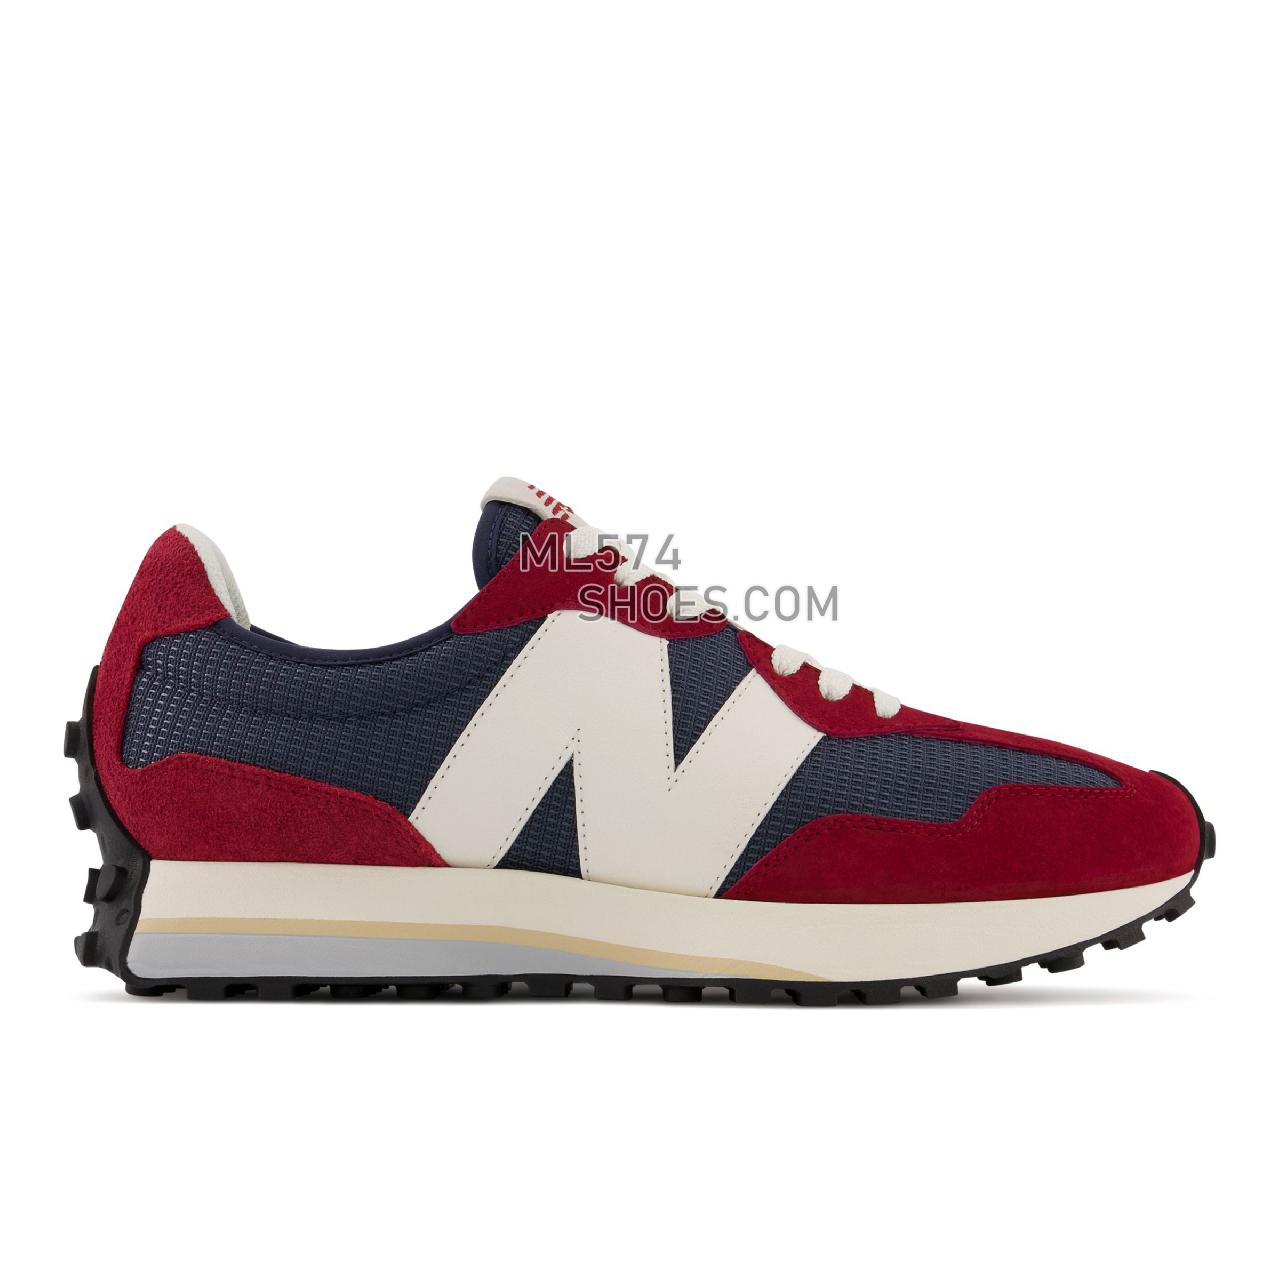 New Balance 327 - Men's Sport Style Sneakers - Nb Navy with Nb Scarlet - MS327MR